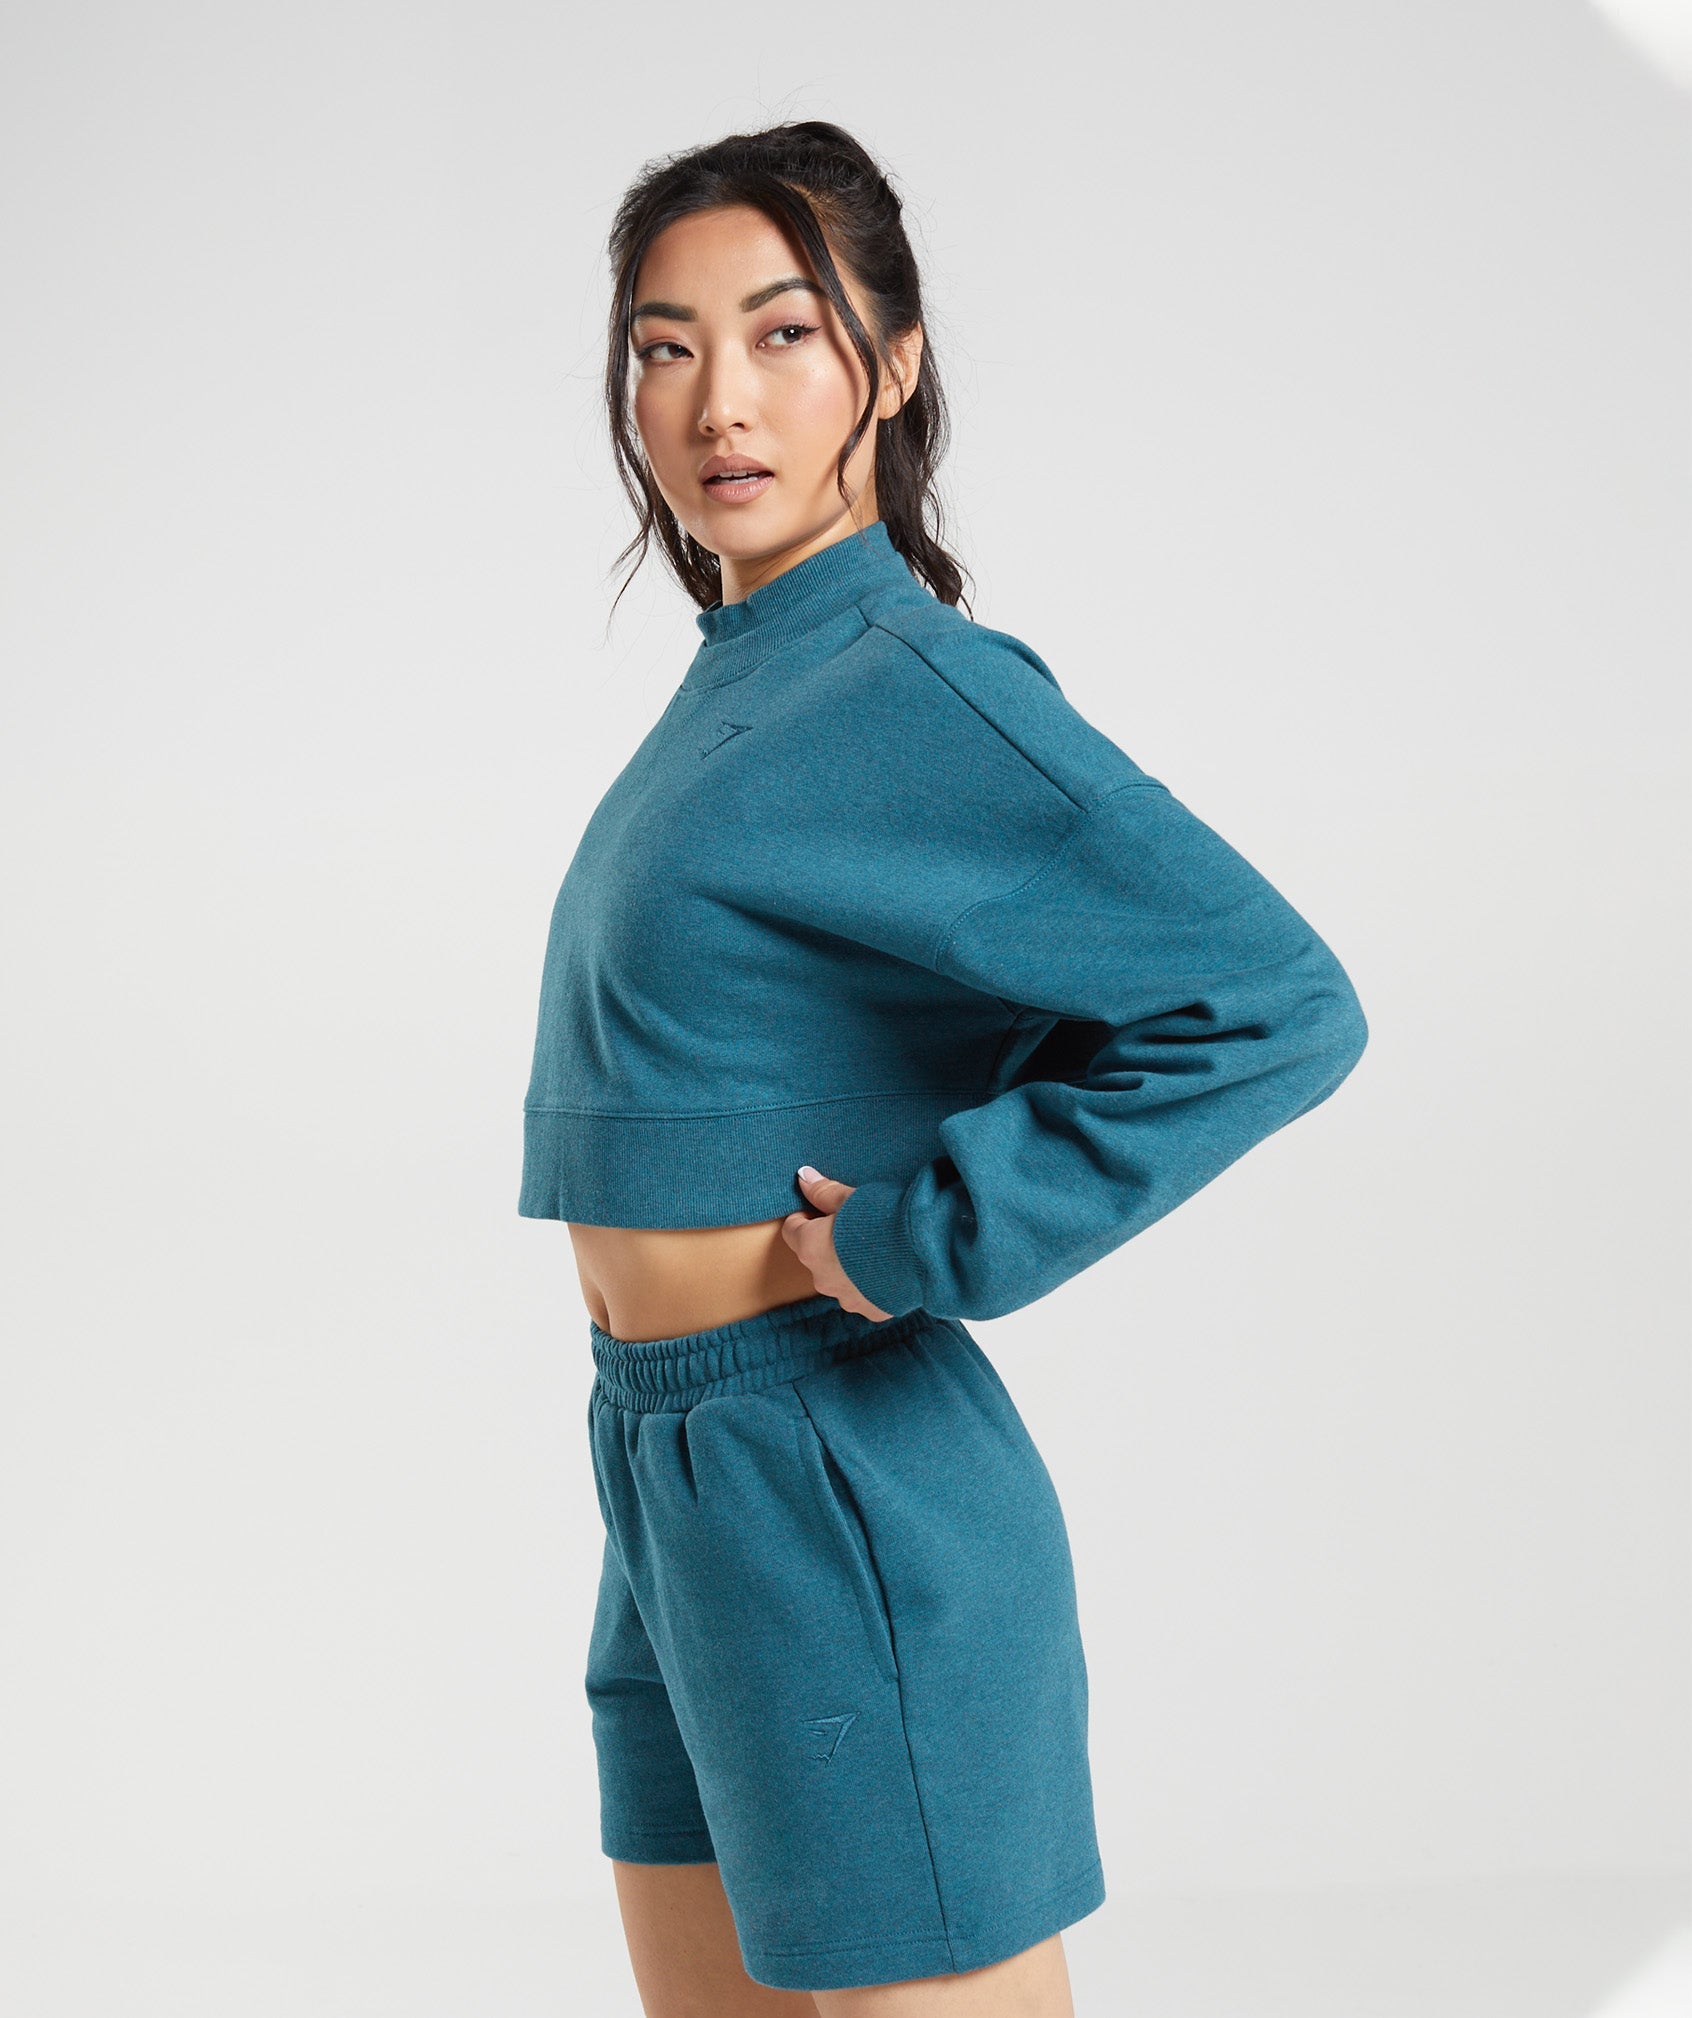 Rest Day Sweats Cropped Pullover in Steel Blue Marl - view 3